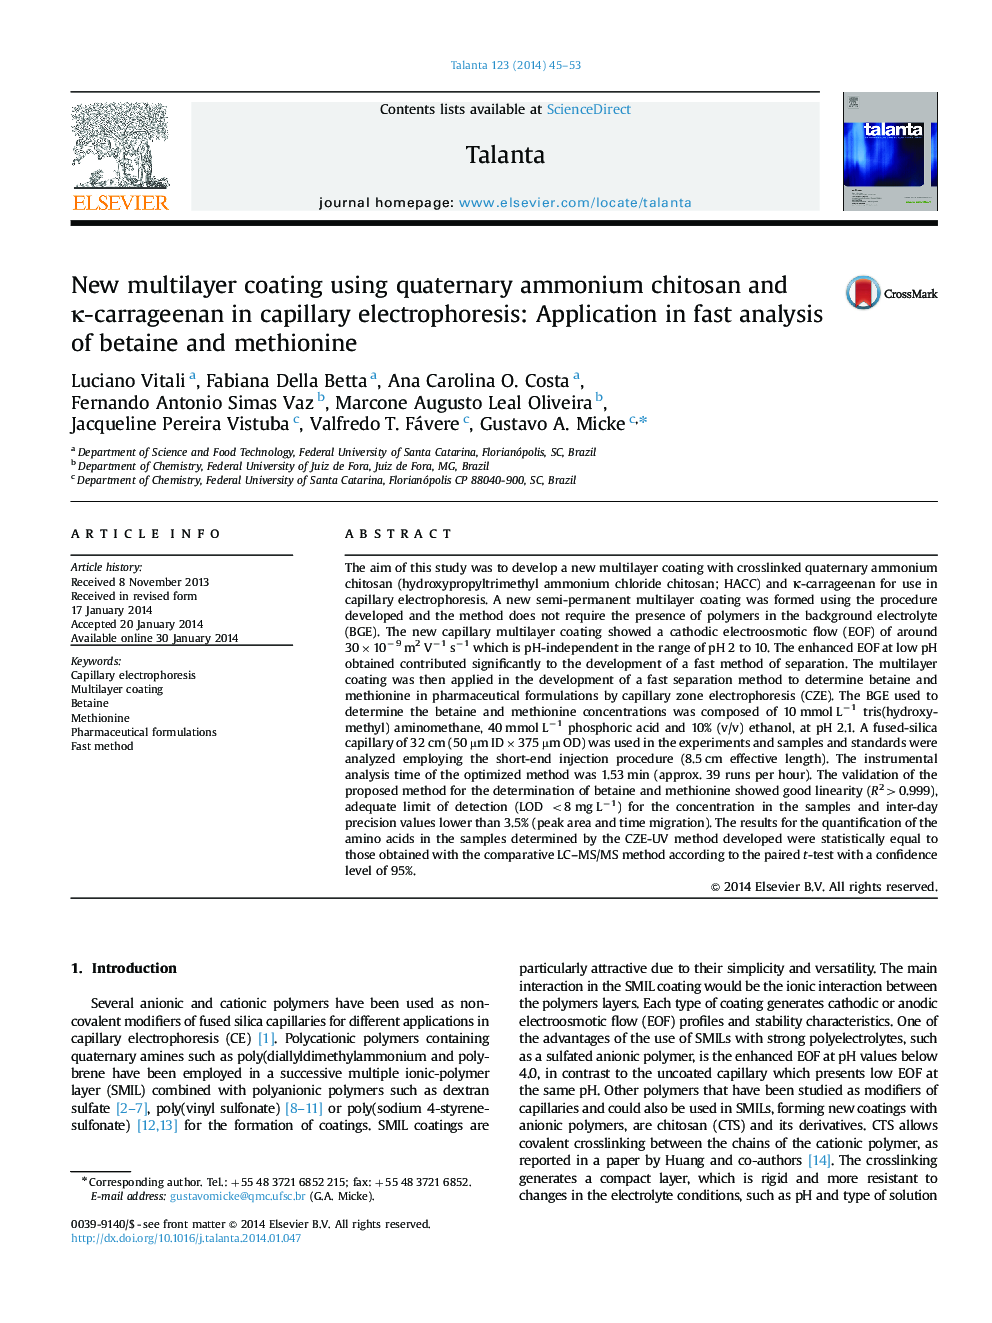 New multilayer coating using quaternary ammonium chitosan and Îº-carrageenan in capillary electrophoresis: Application in fast analysis of betaine and methionine